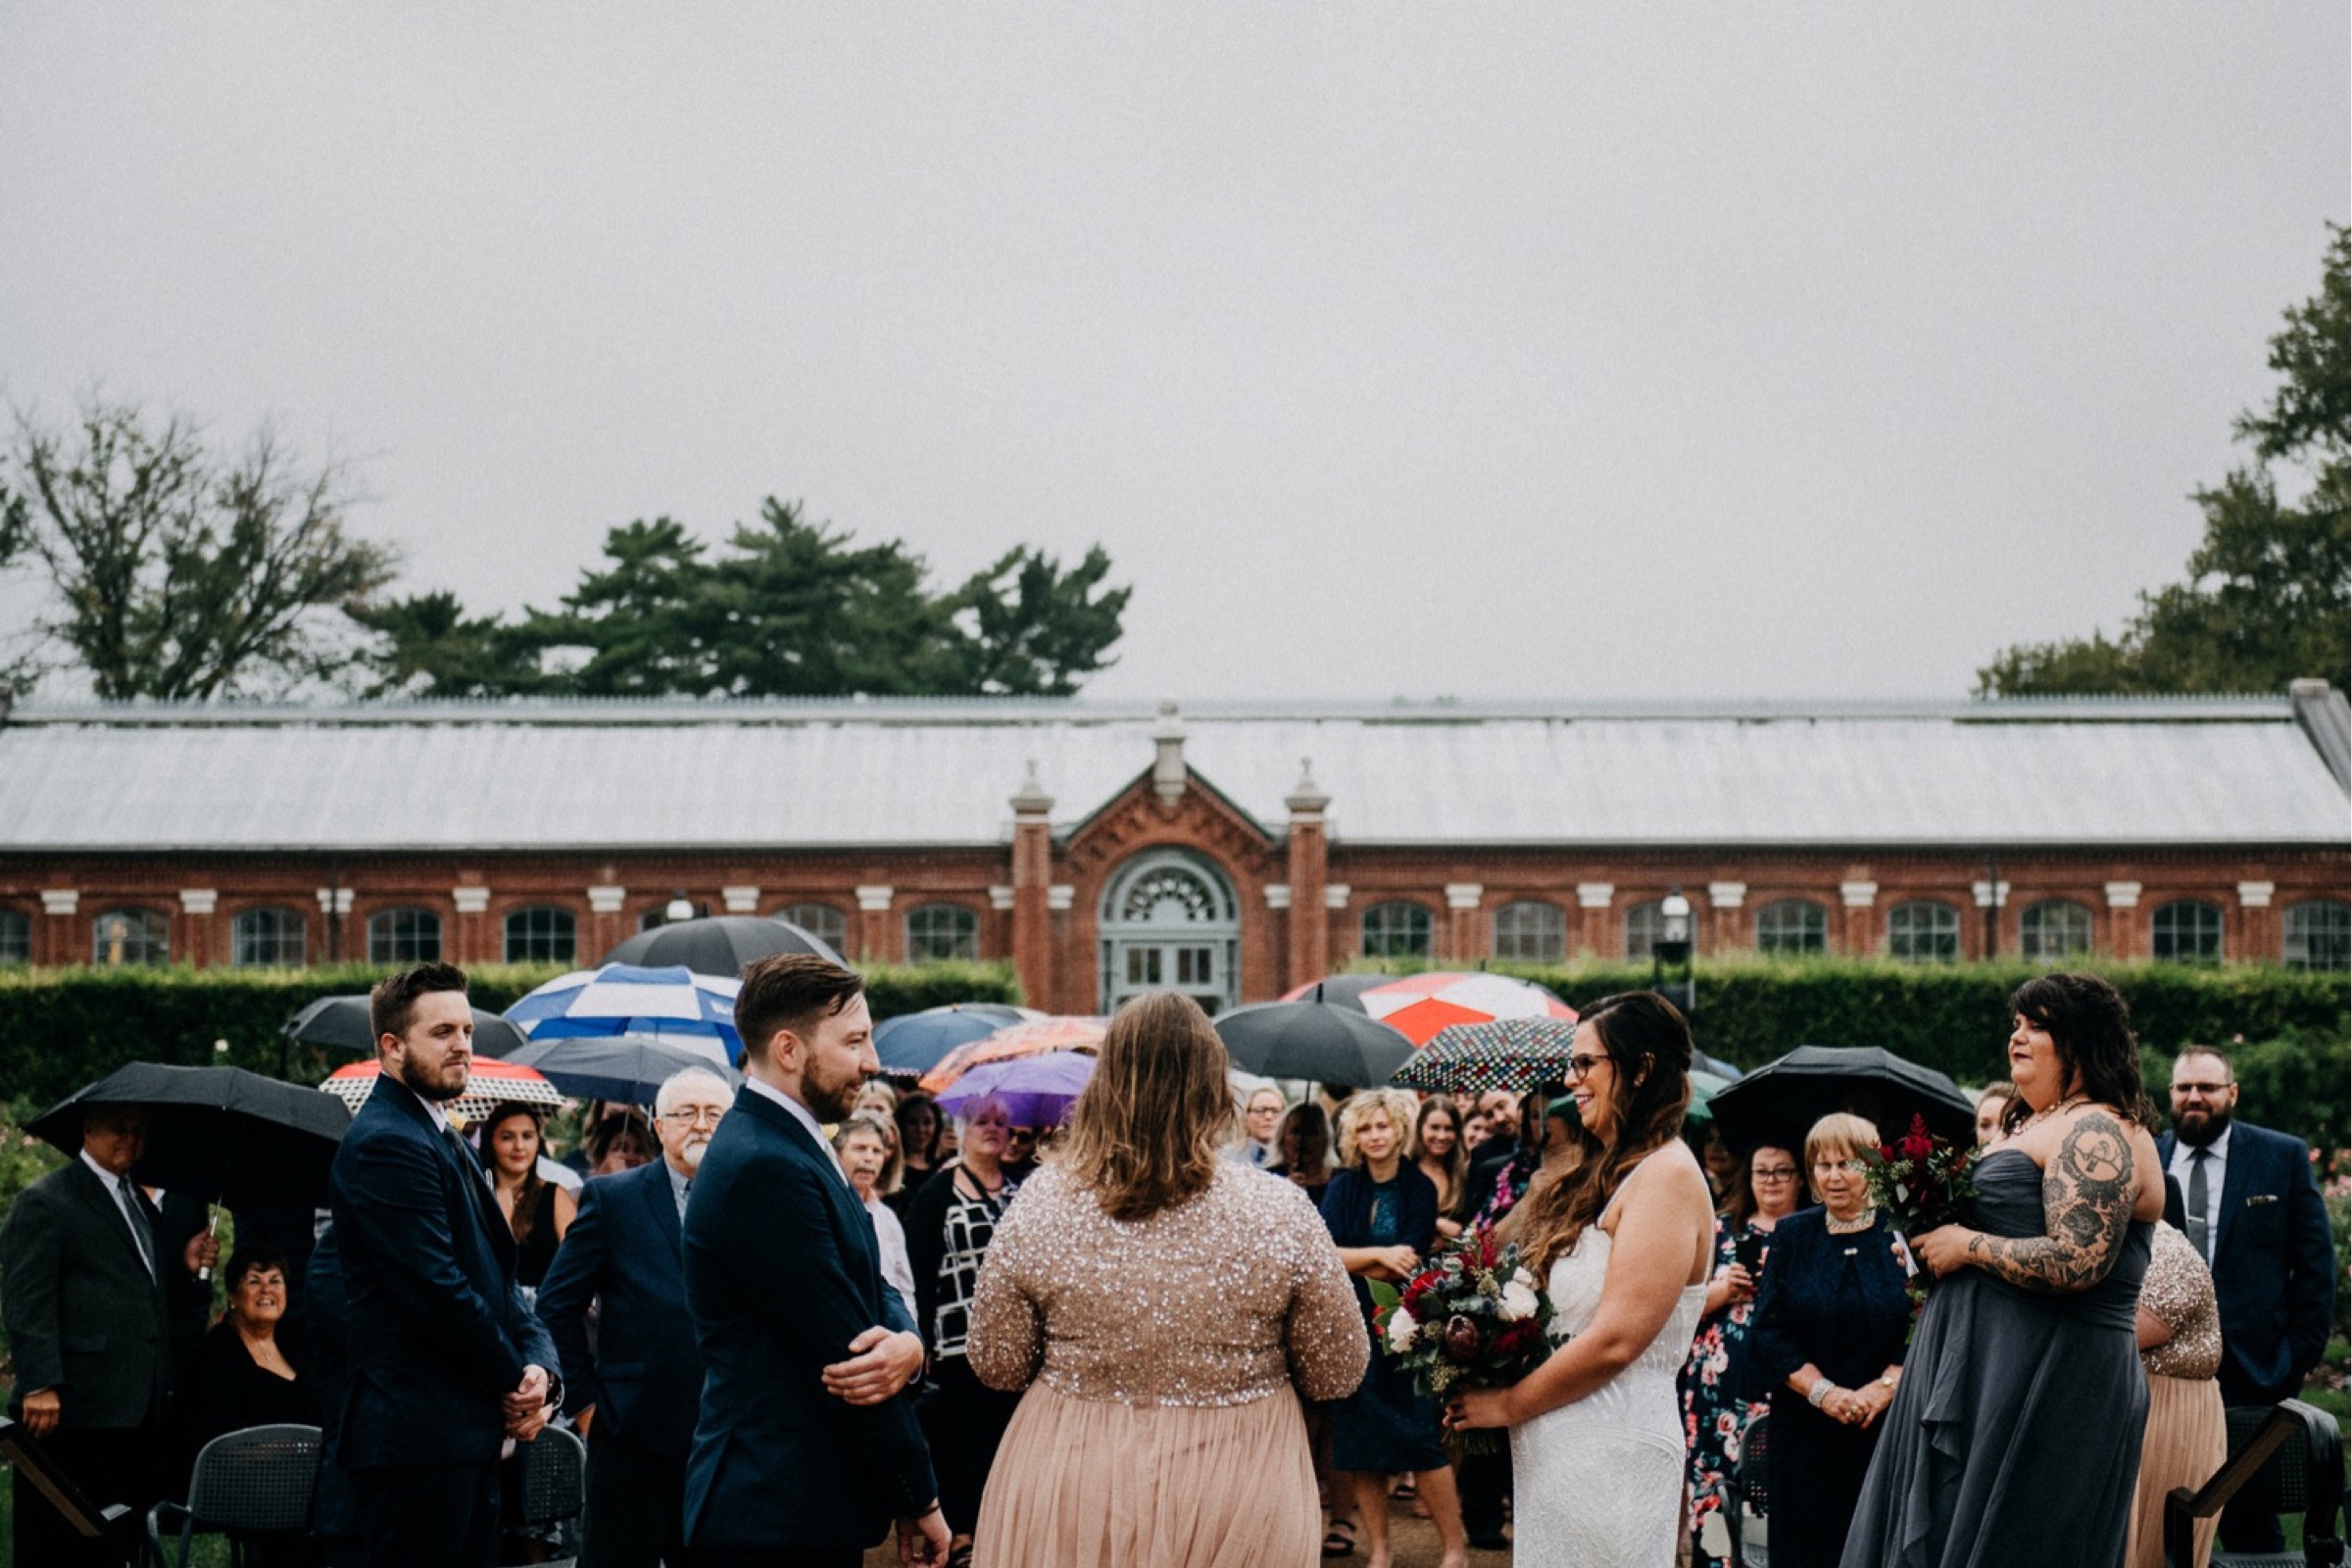 Guests hold umbrellas during a rainy ceremony part of a wedding day timeline